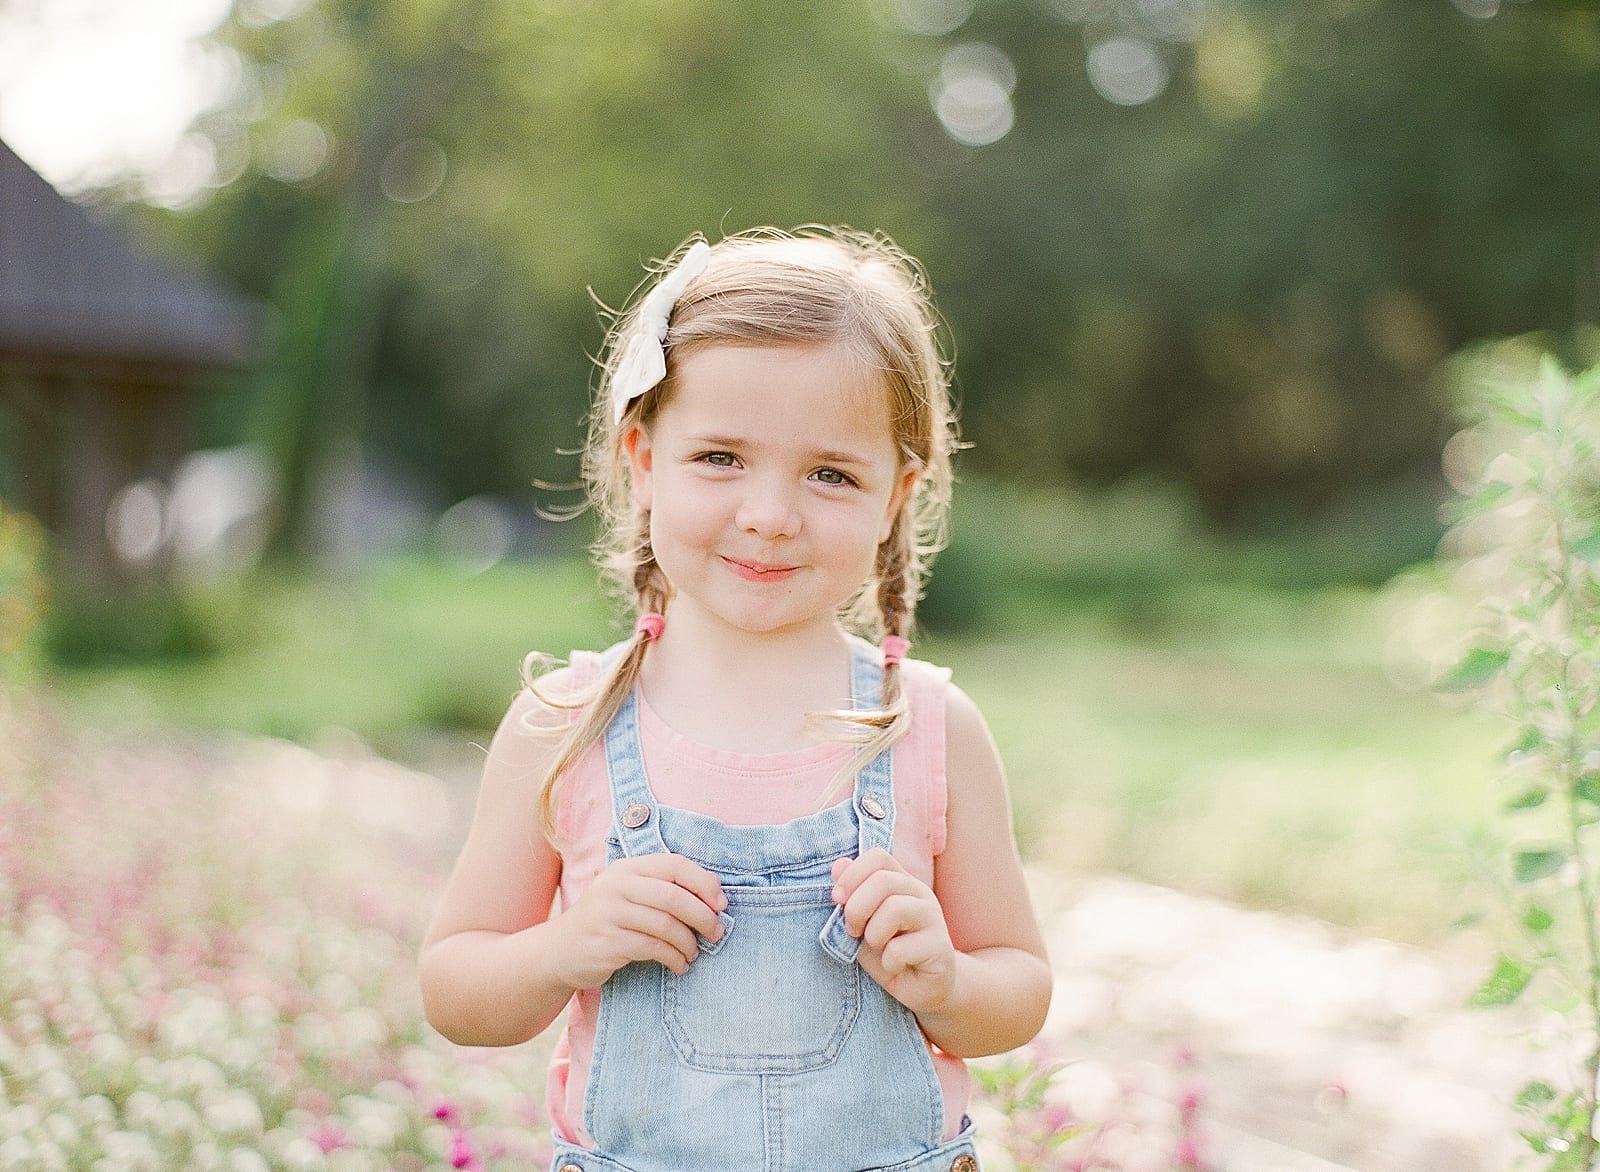 Little Girl With a Sweet Smile in Overalls Photo